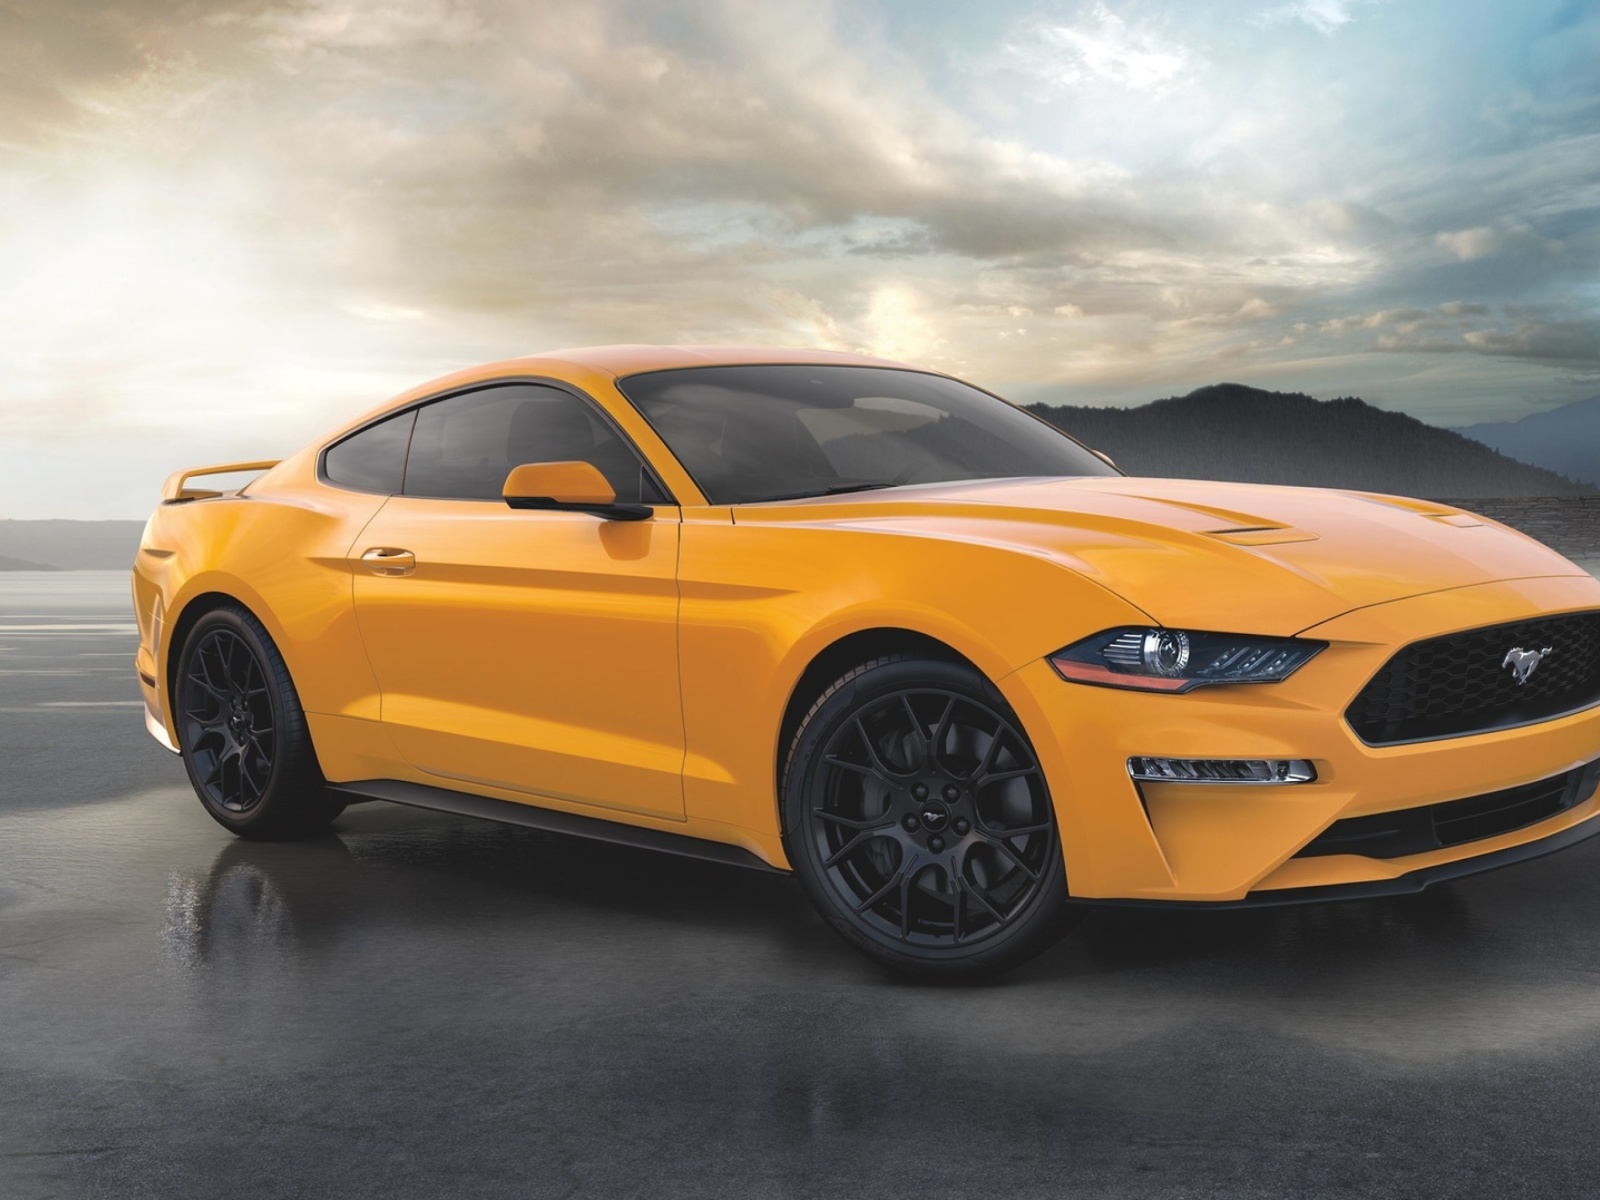 Das Ford Mustang Coupe Wallpaper 1600x1200